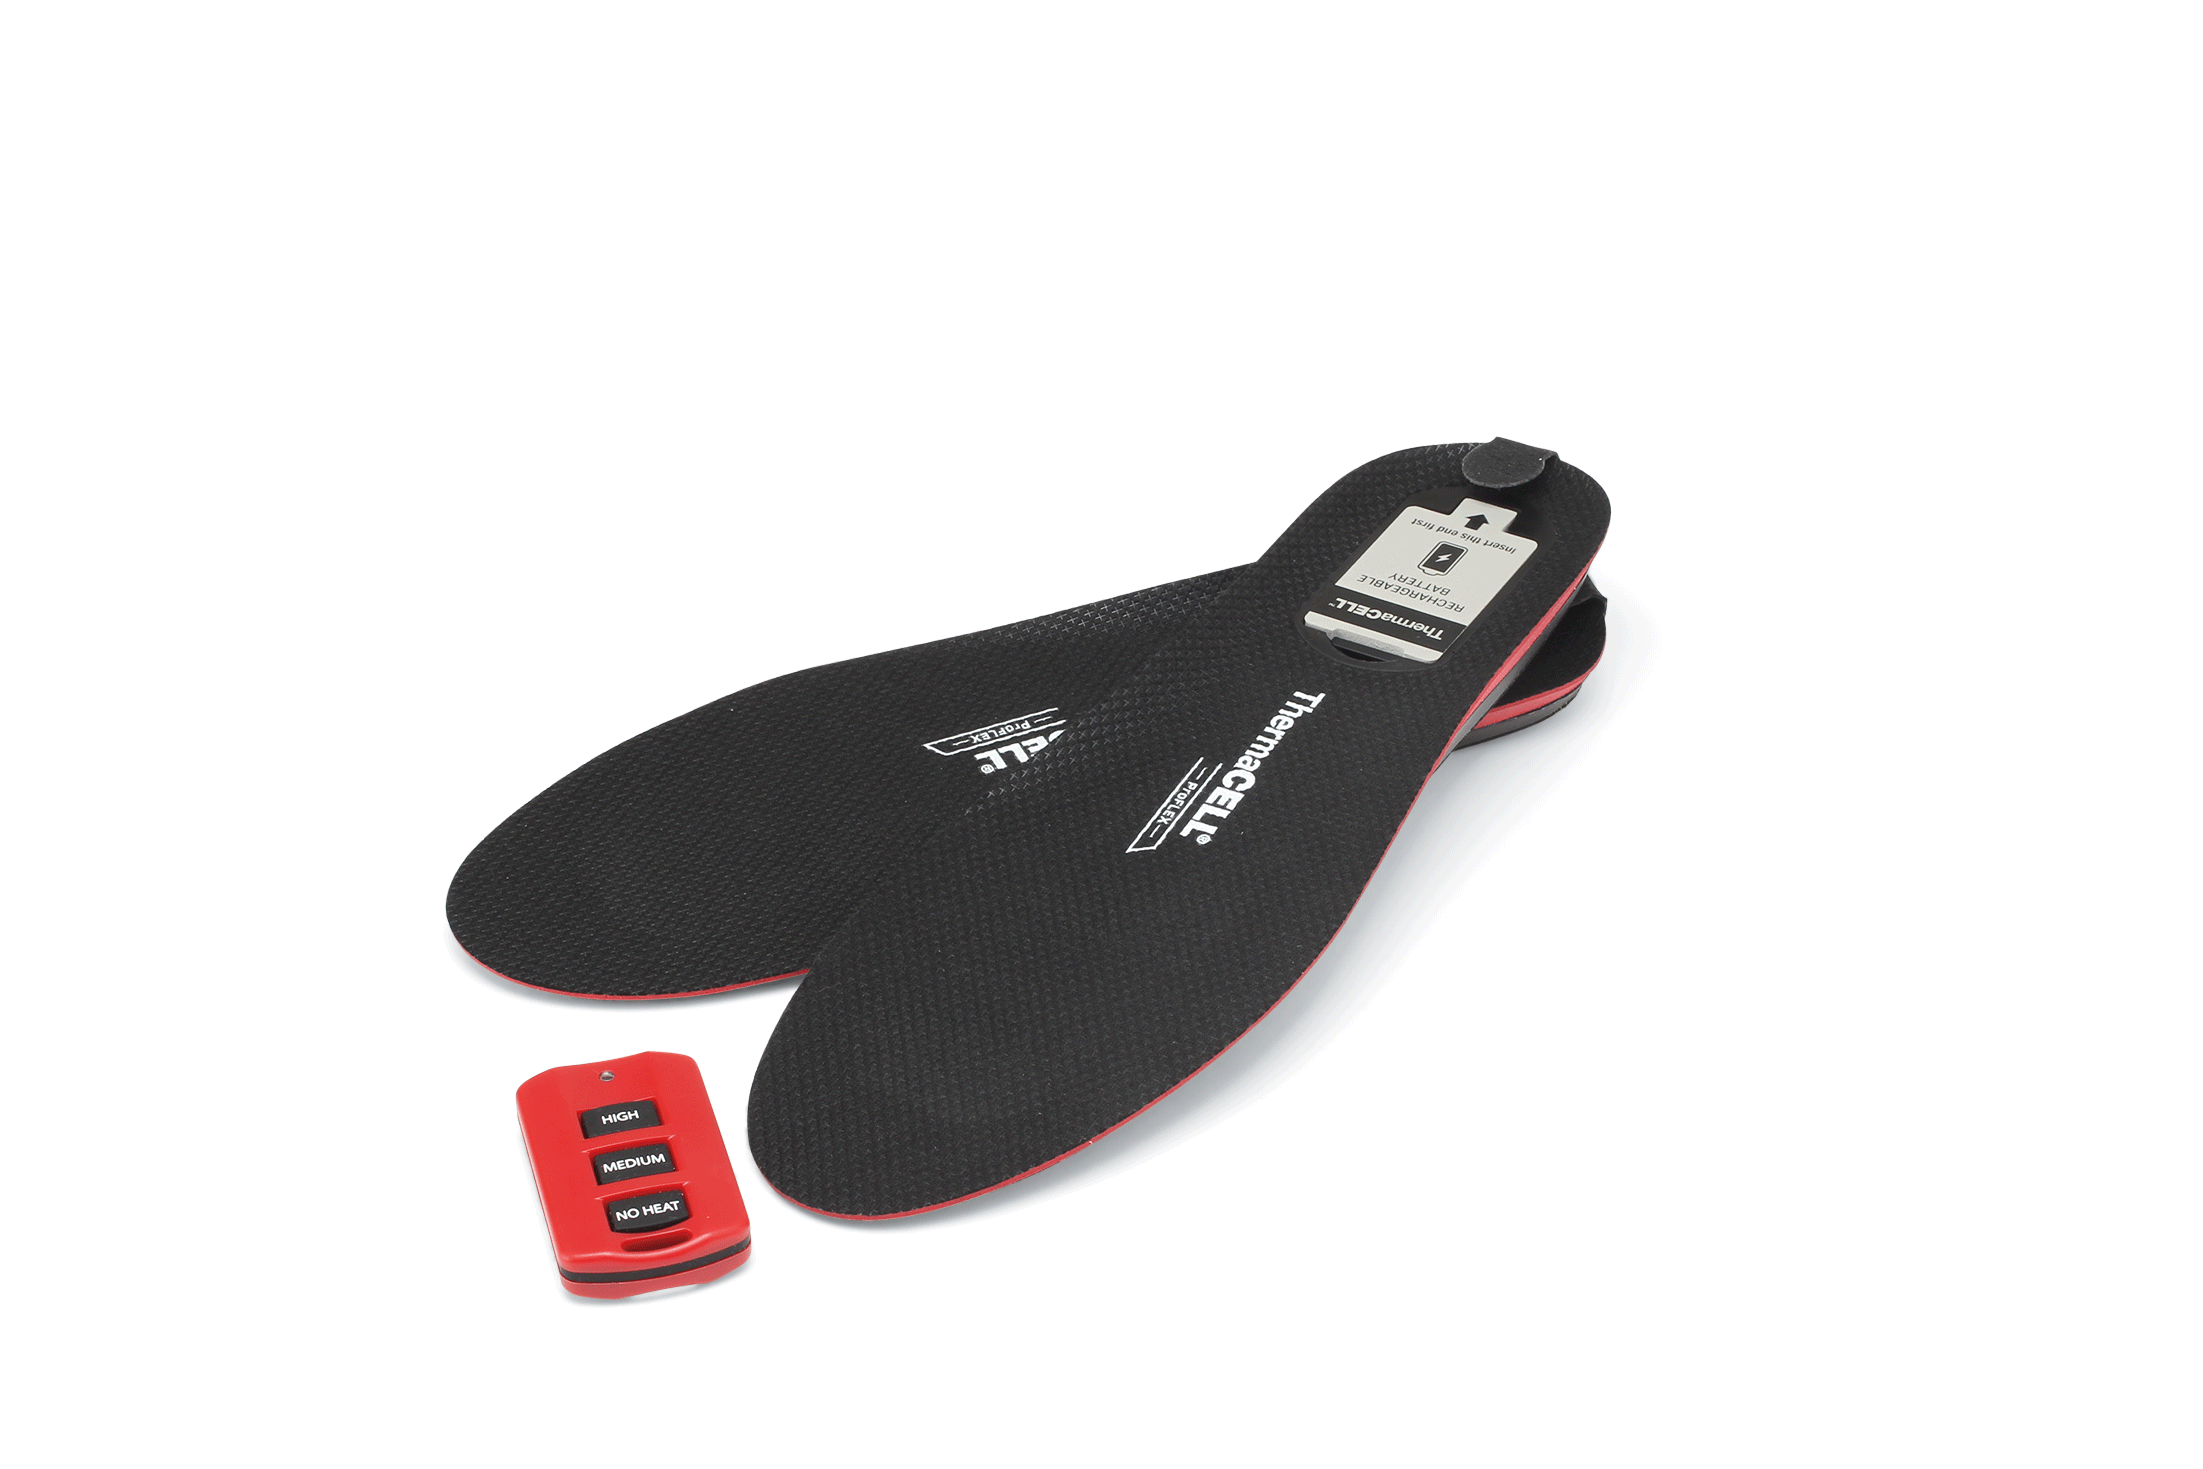 Thermacell ProFLEX Heated Insoles